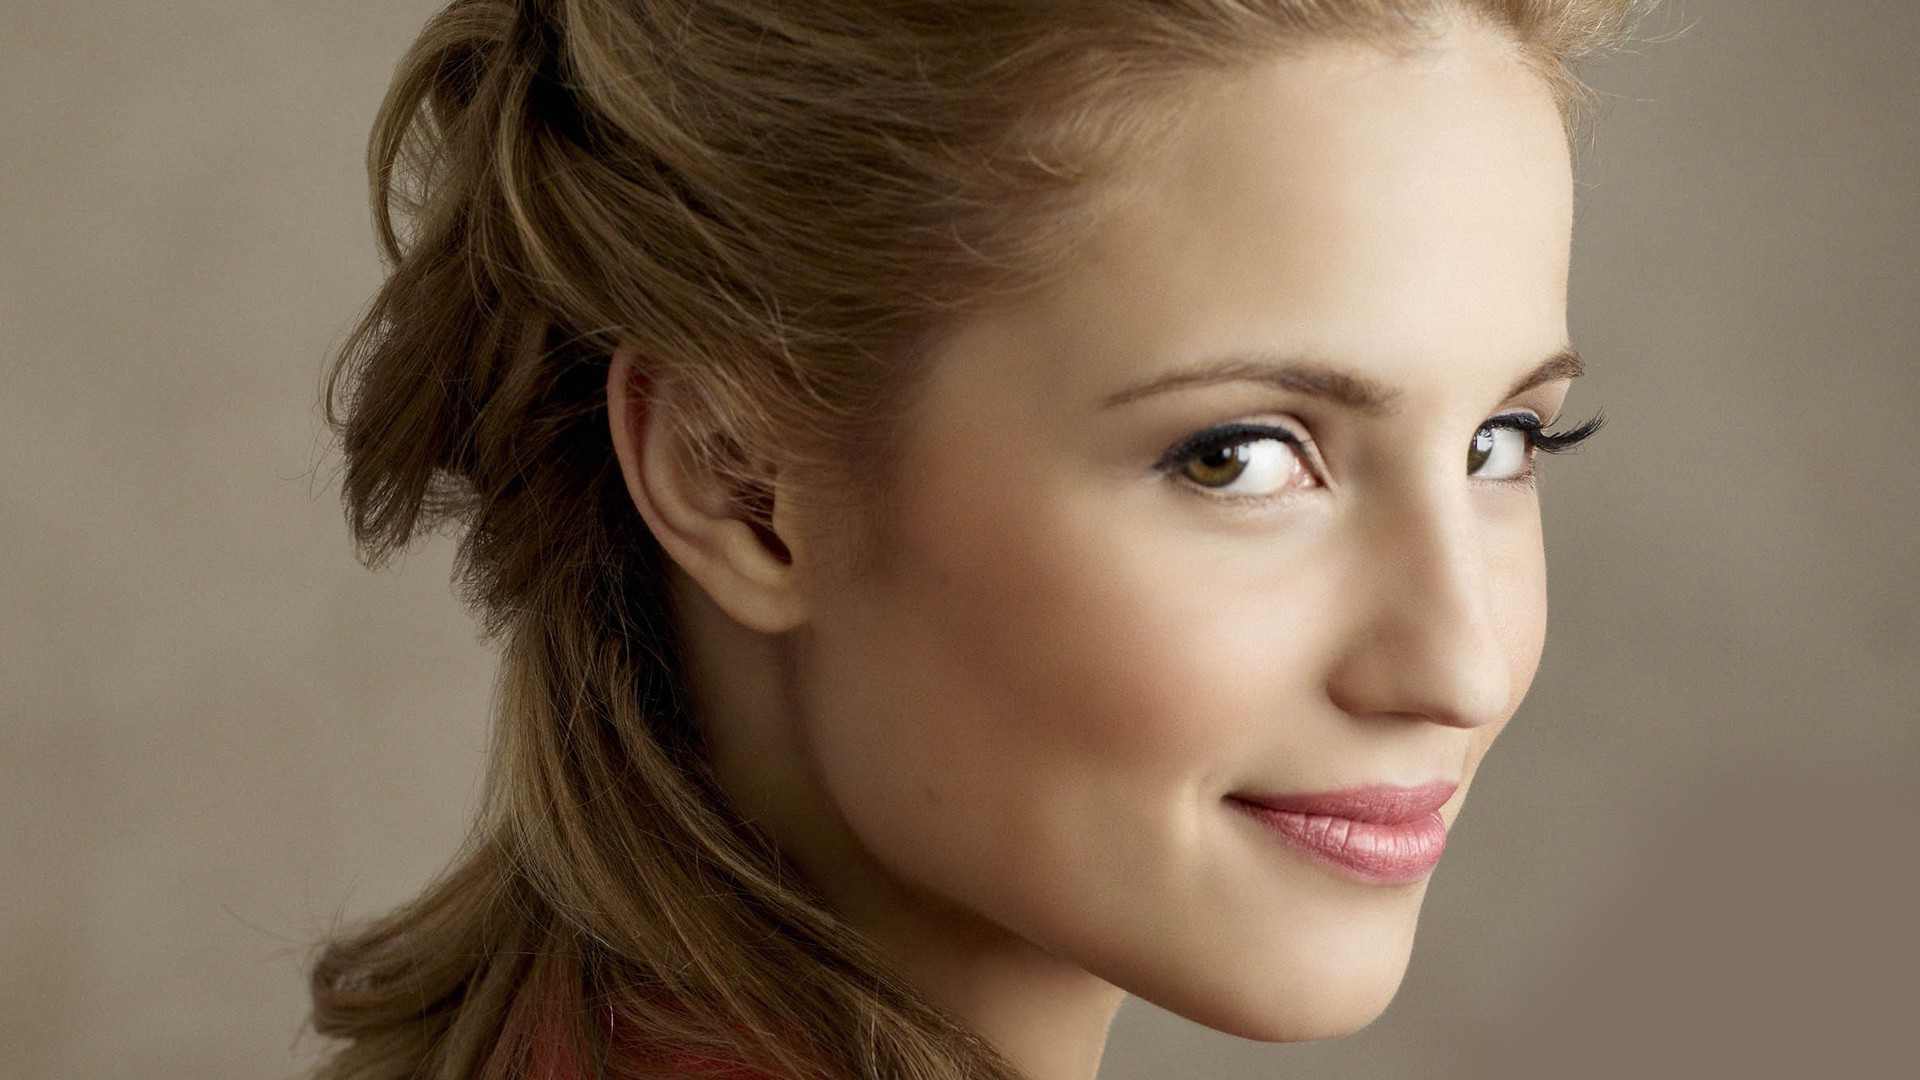 Dianna Agron Wallpapers High Quality Download Free